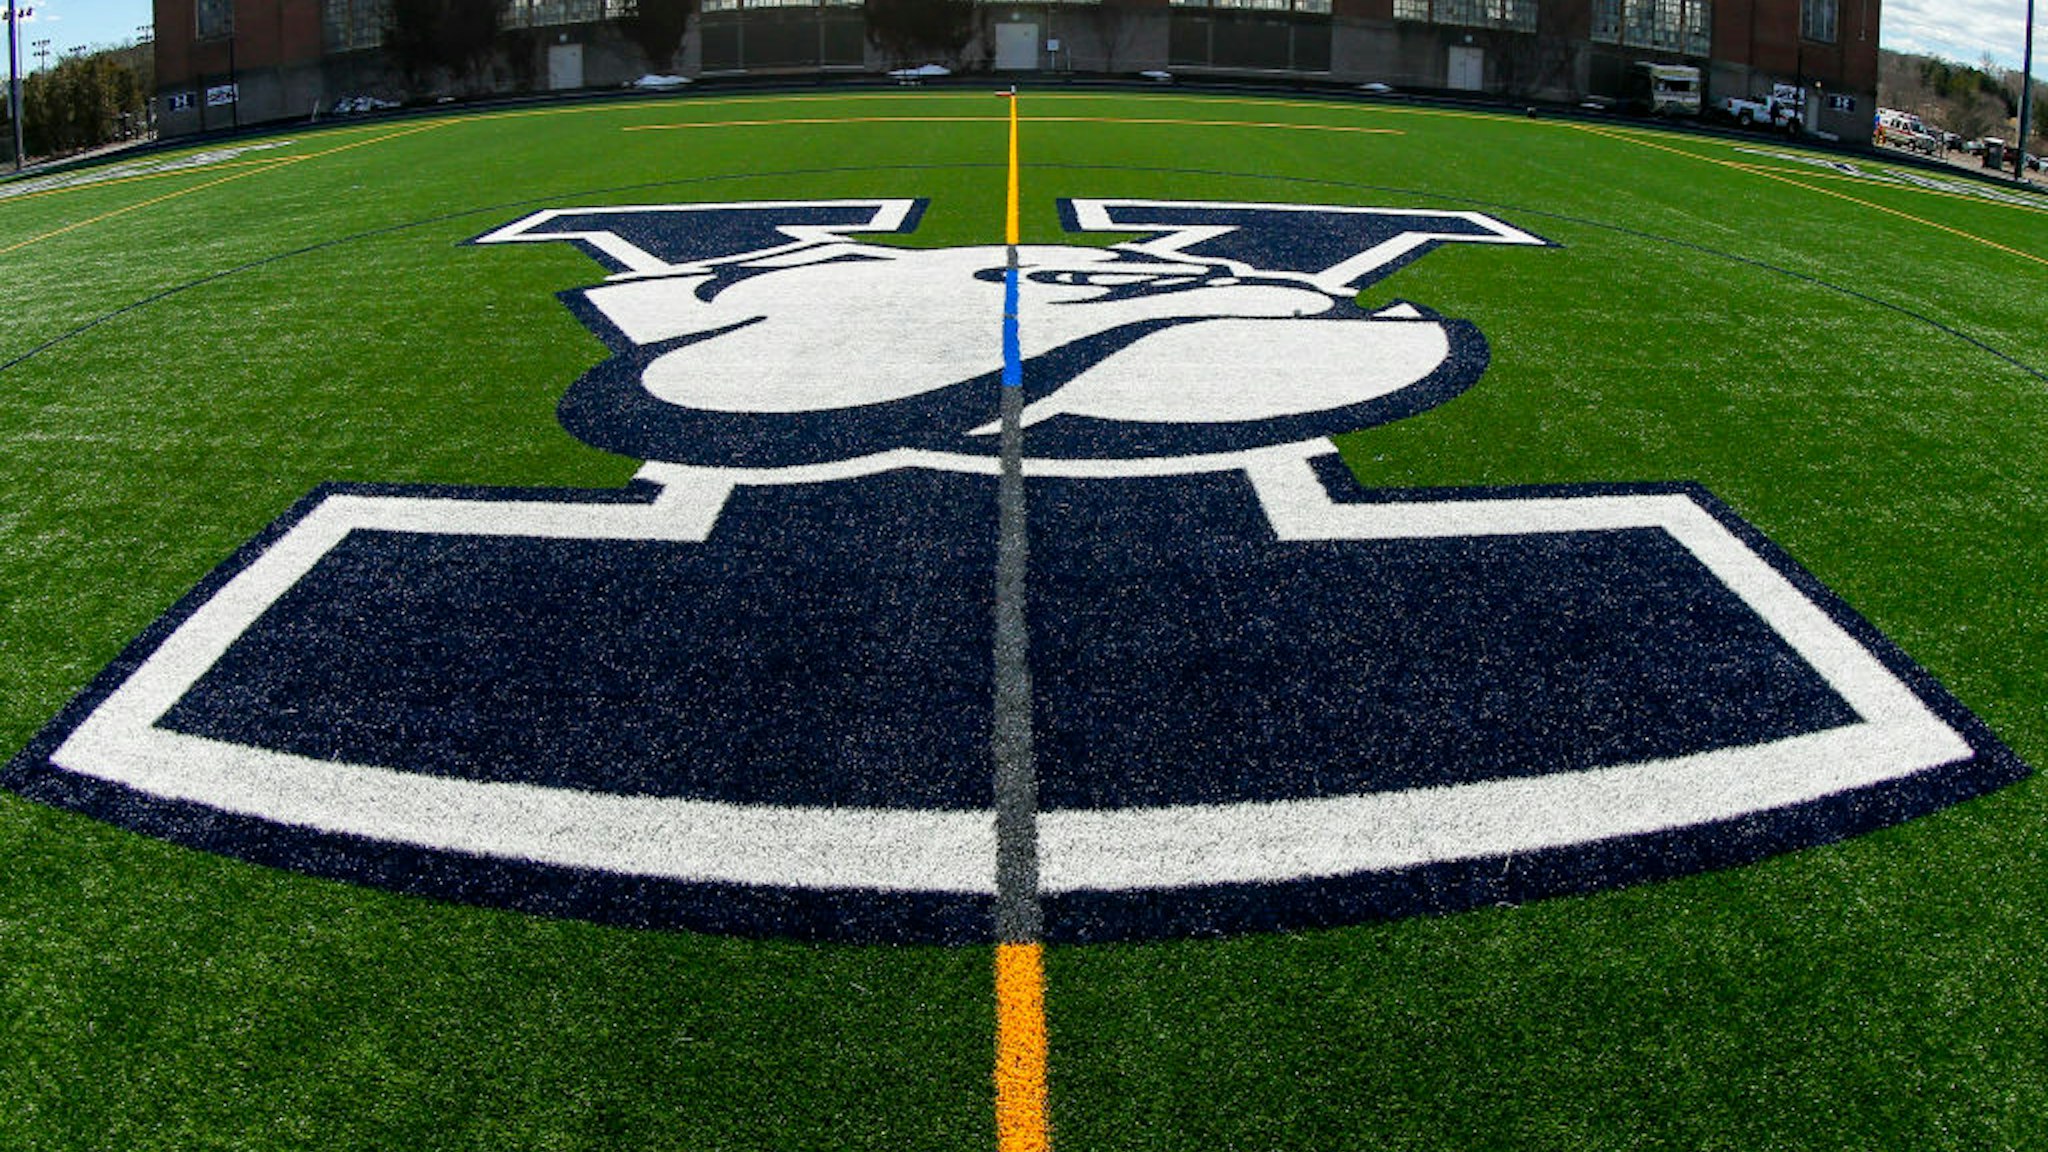 NEW HAVEN, CT - MARCH 16: General view of the Yale Bulldogs logo on the field at Reese Stadium prior to the game against the Cornell Big Red on March 16, 2019 in New Haven, Connecticut. Yale defeated Cornell 16-11. (Photo by Rich Barnes/Getty Images)